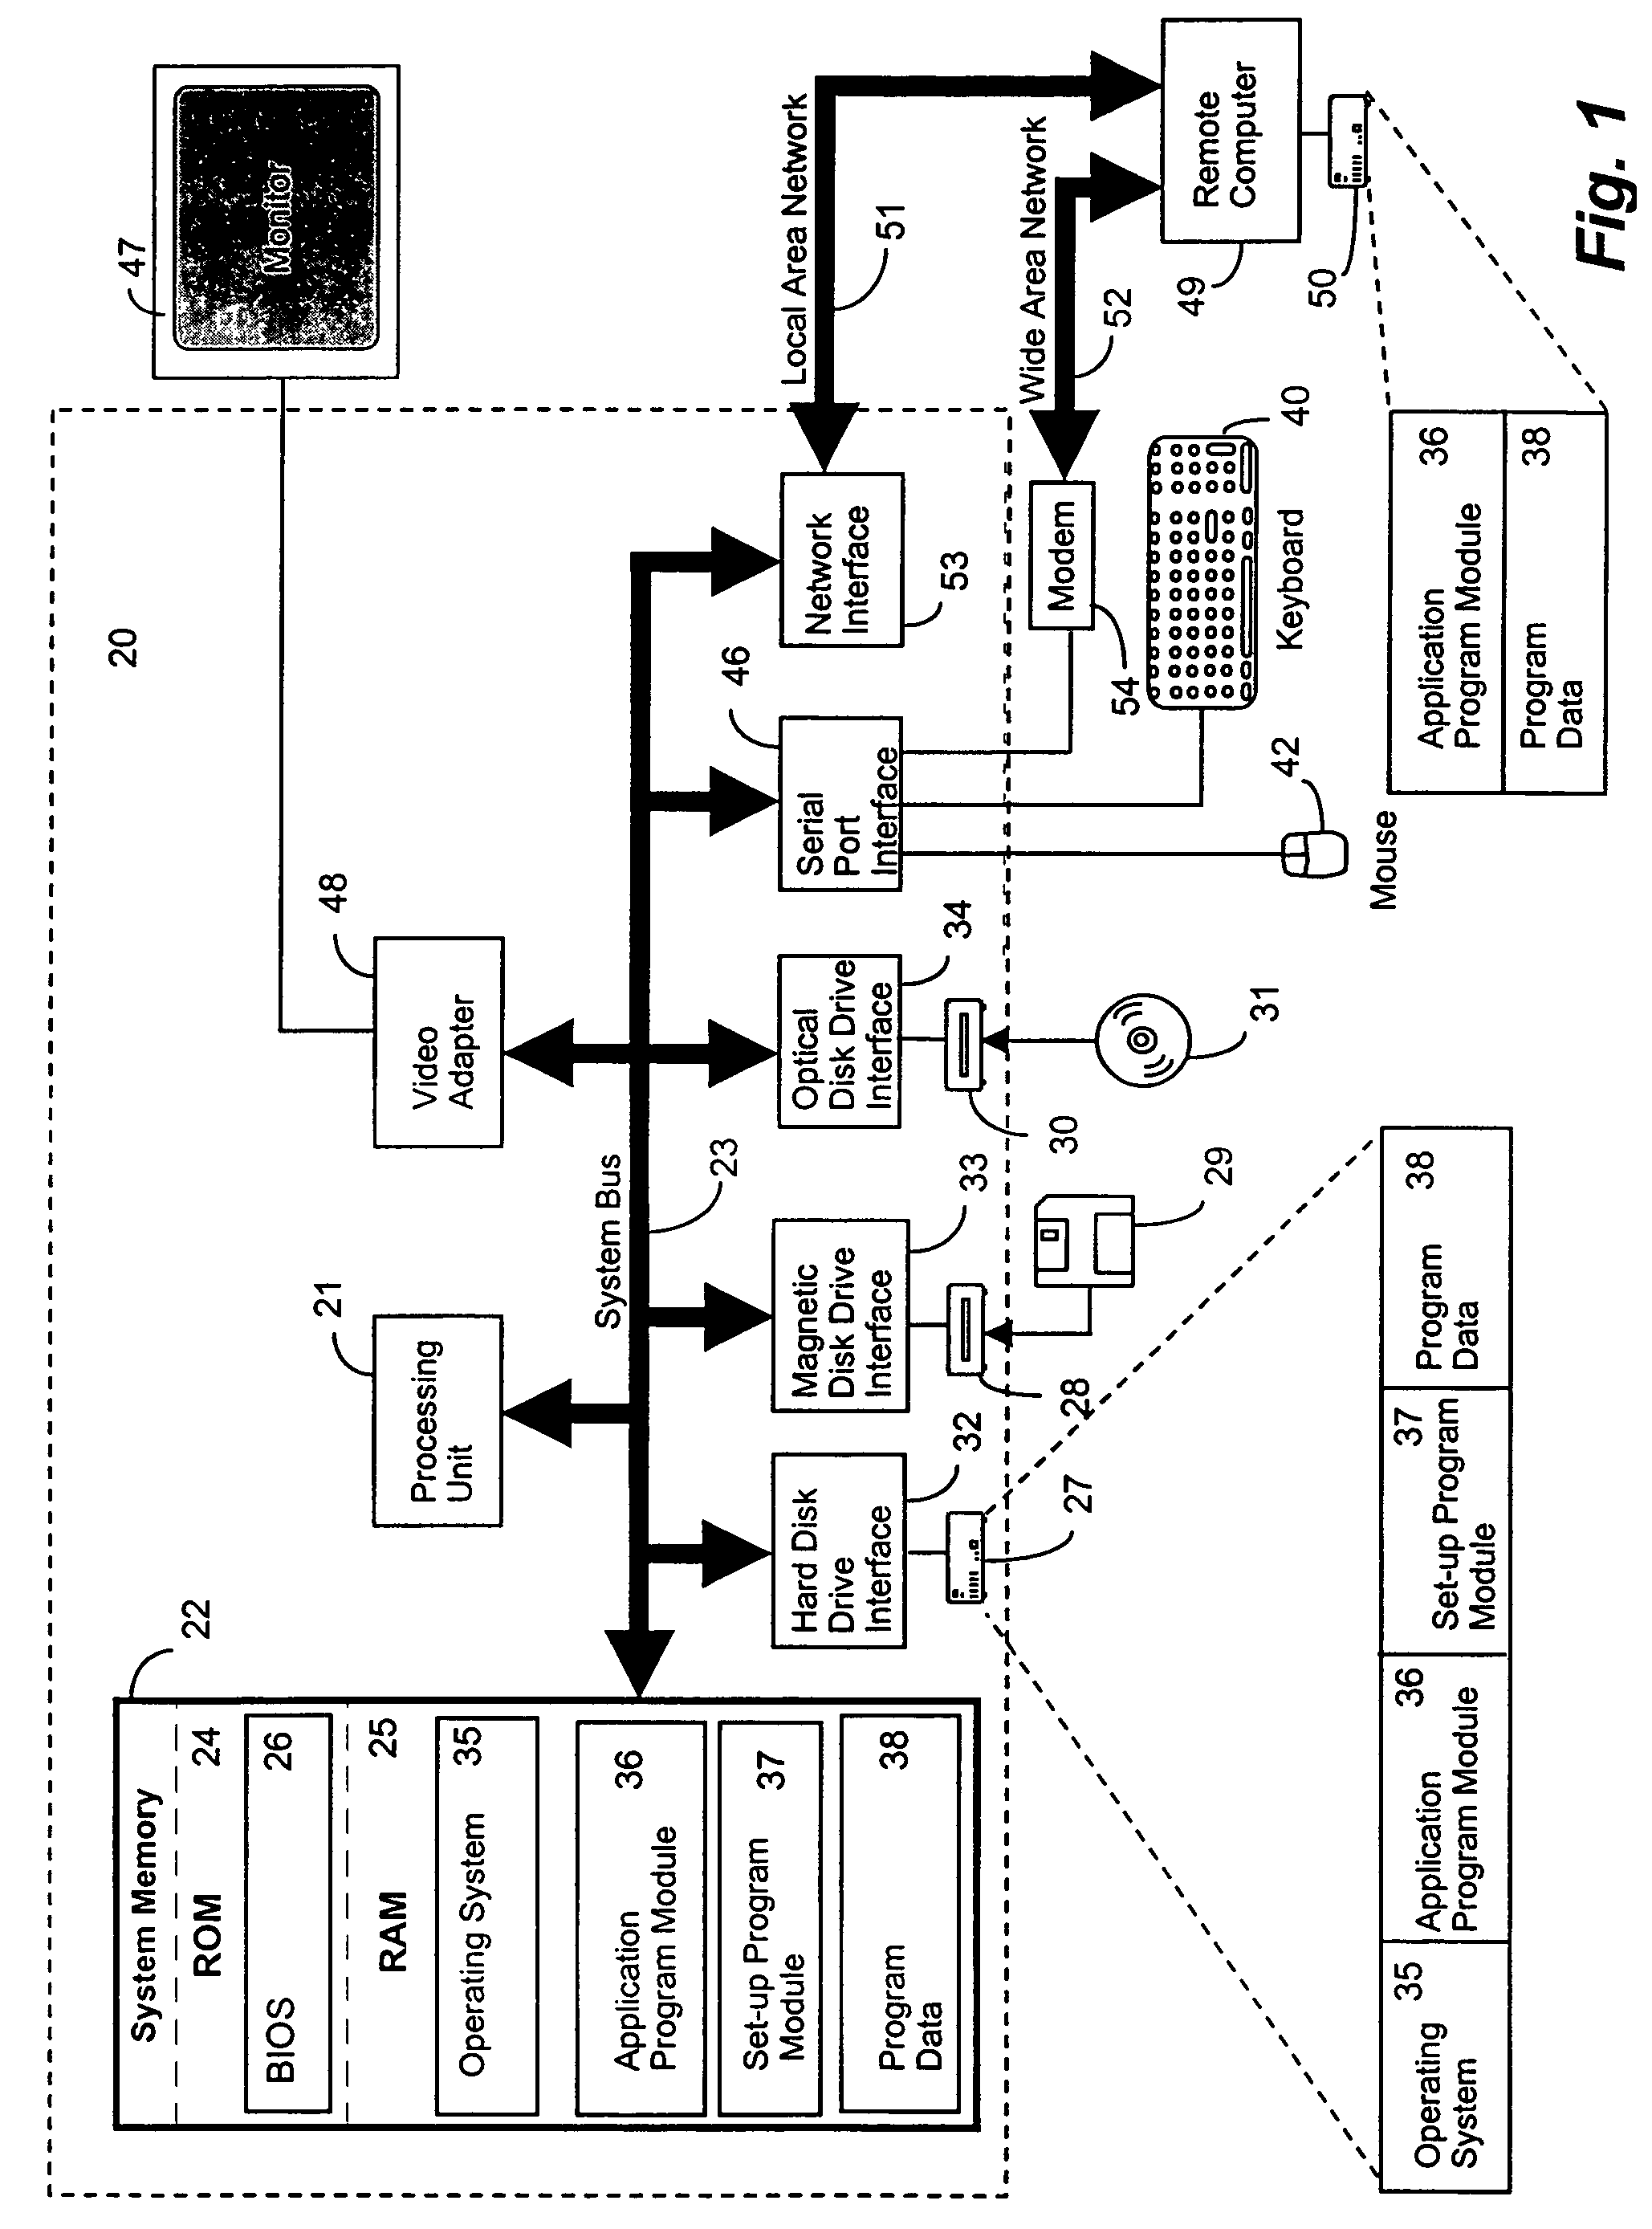 Method and system for tracking client software use